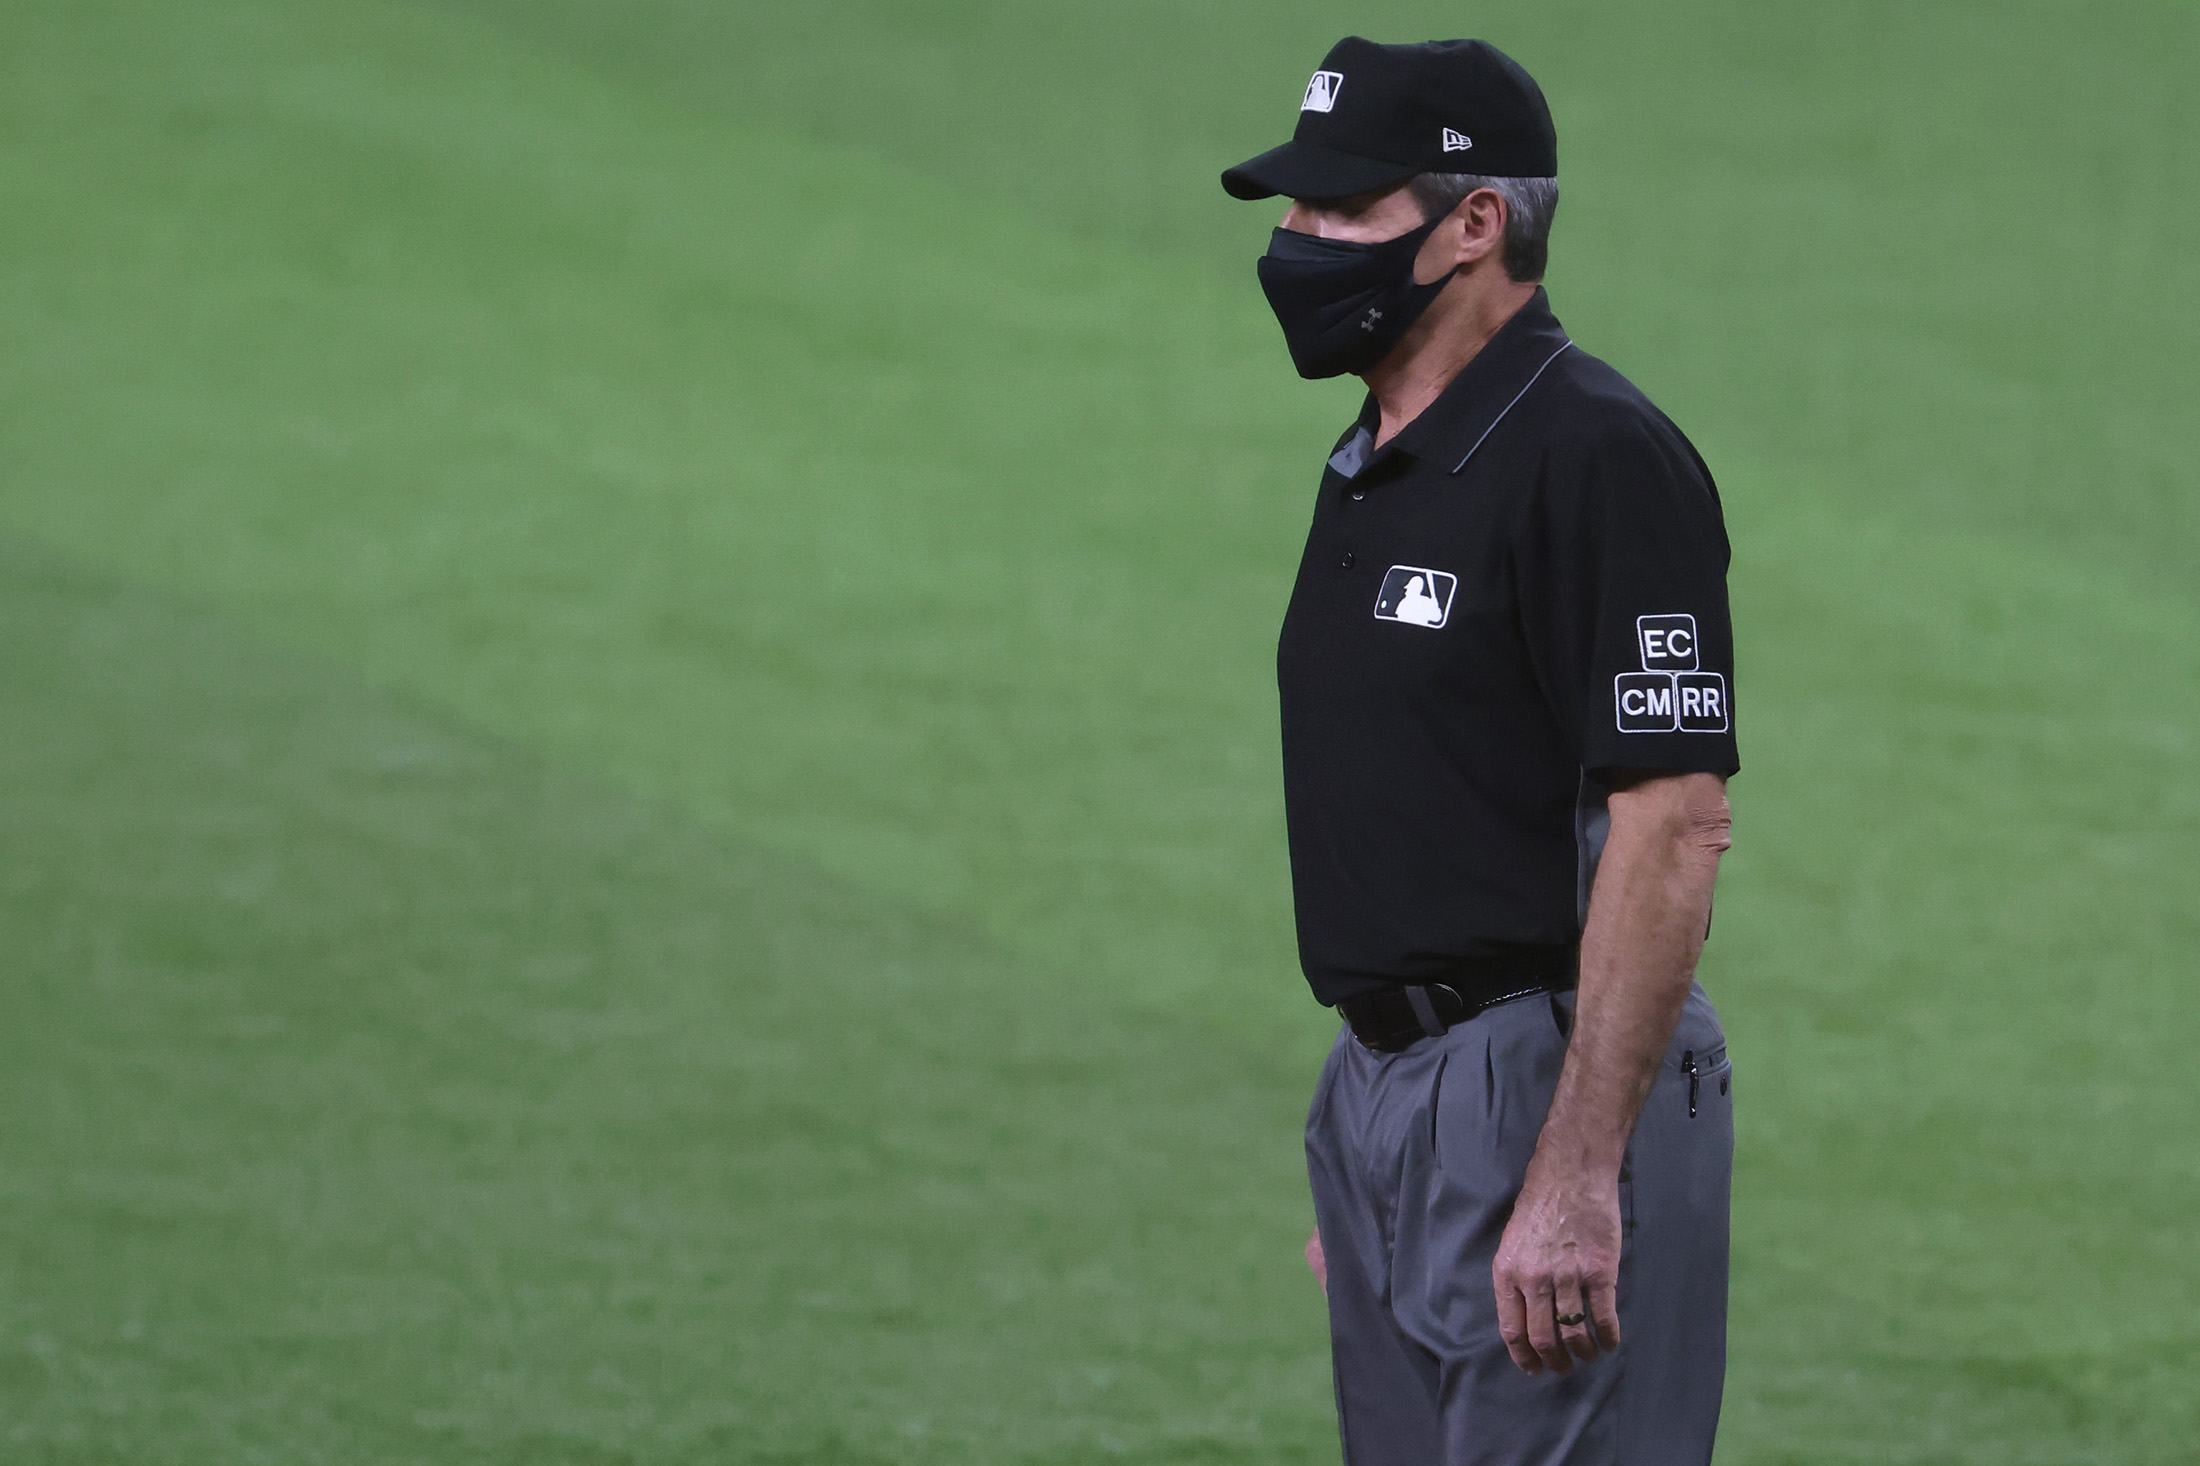 MLB Umpire Carlos Torres masked up in the heat at Citifield. #Keezcam  #Keezonsports #mlb #baseball #umpires #carlostorres #citifield…